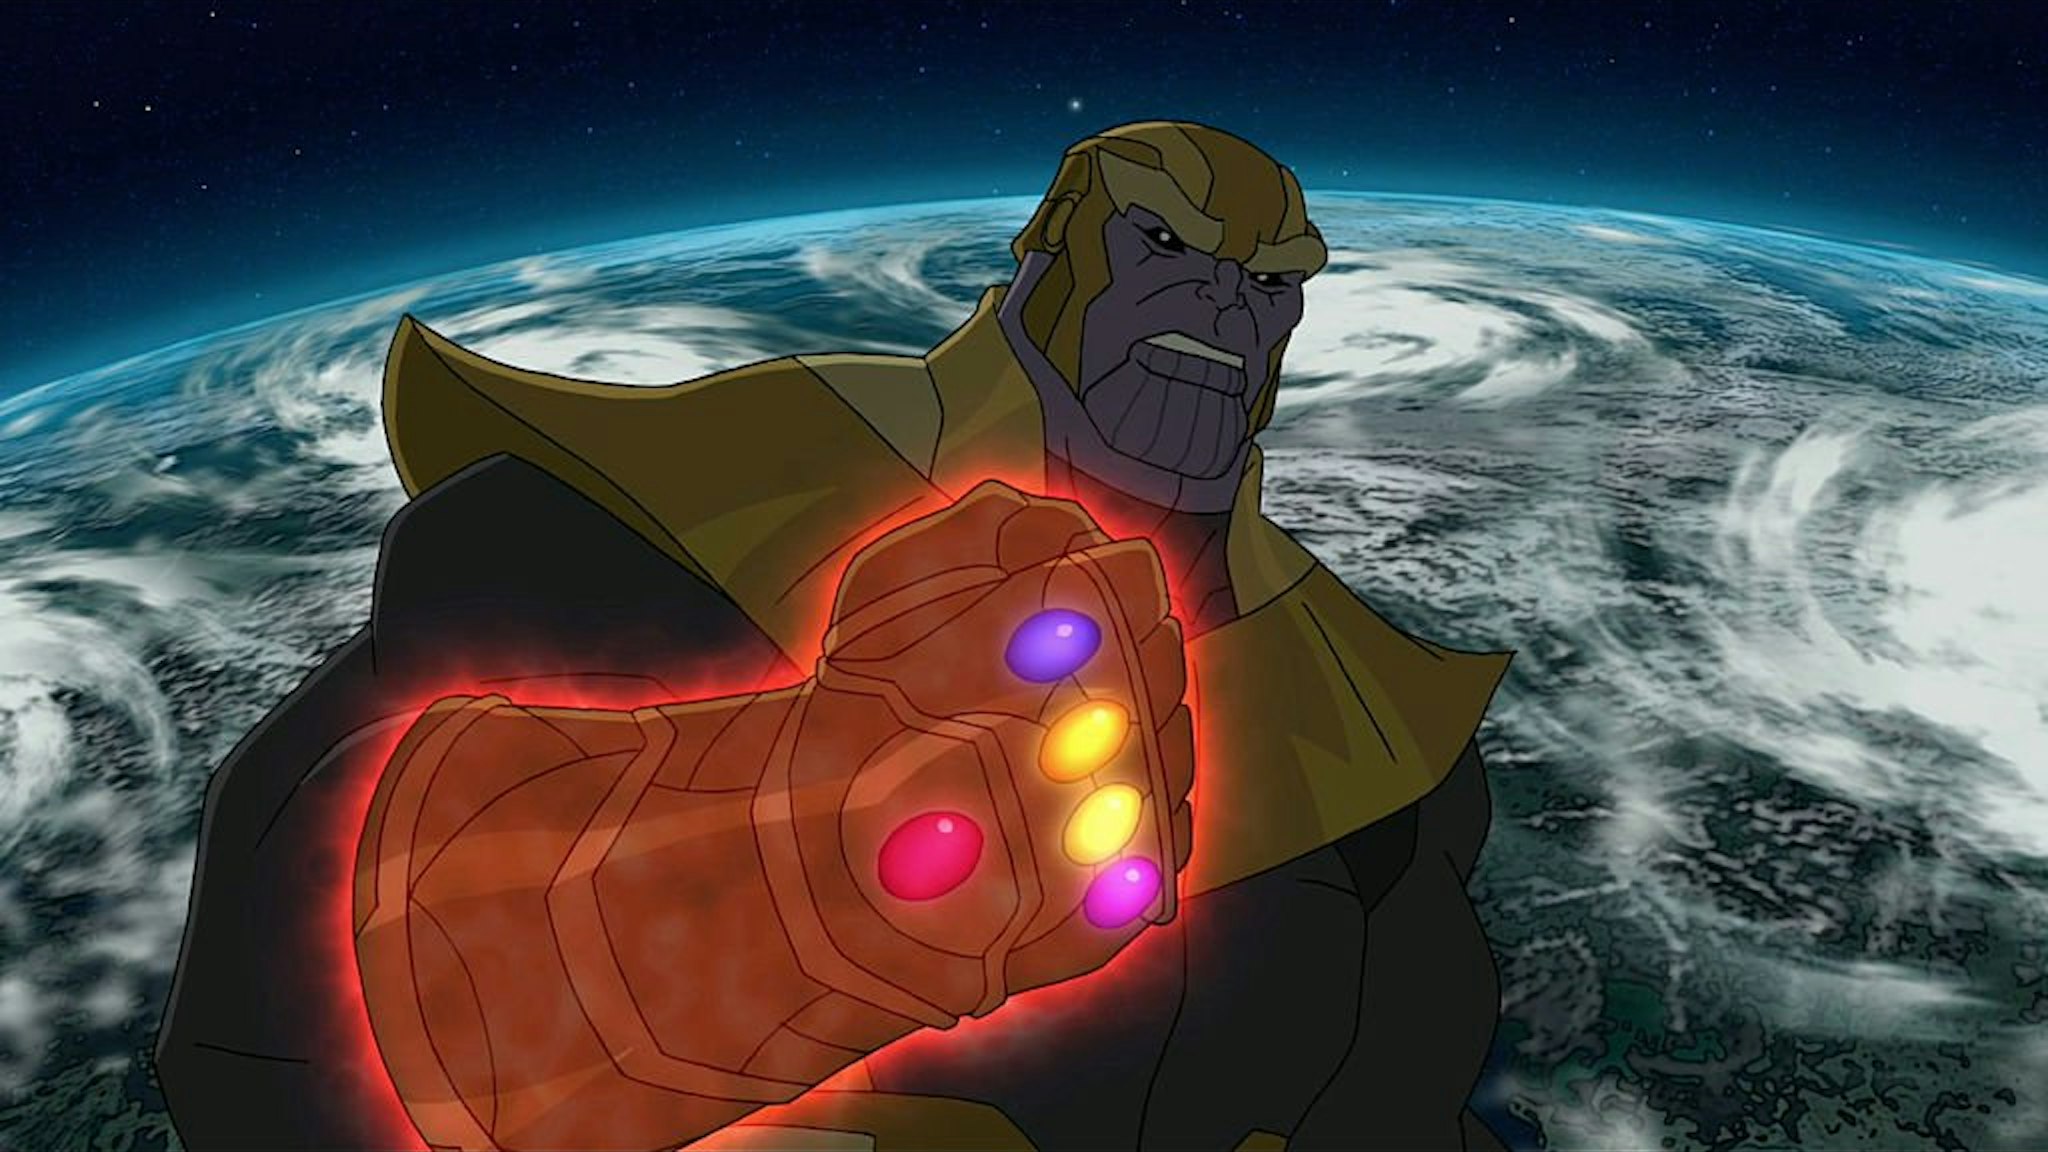 With the power and might of all five Infinity Stones finally in his gauntlet, Thanos plans to wield his power over the Universe while the Avengers make a desperate attempt to stop him.